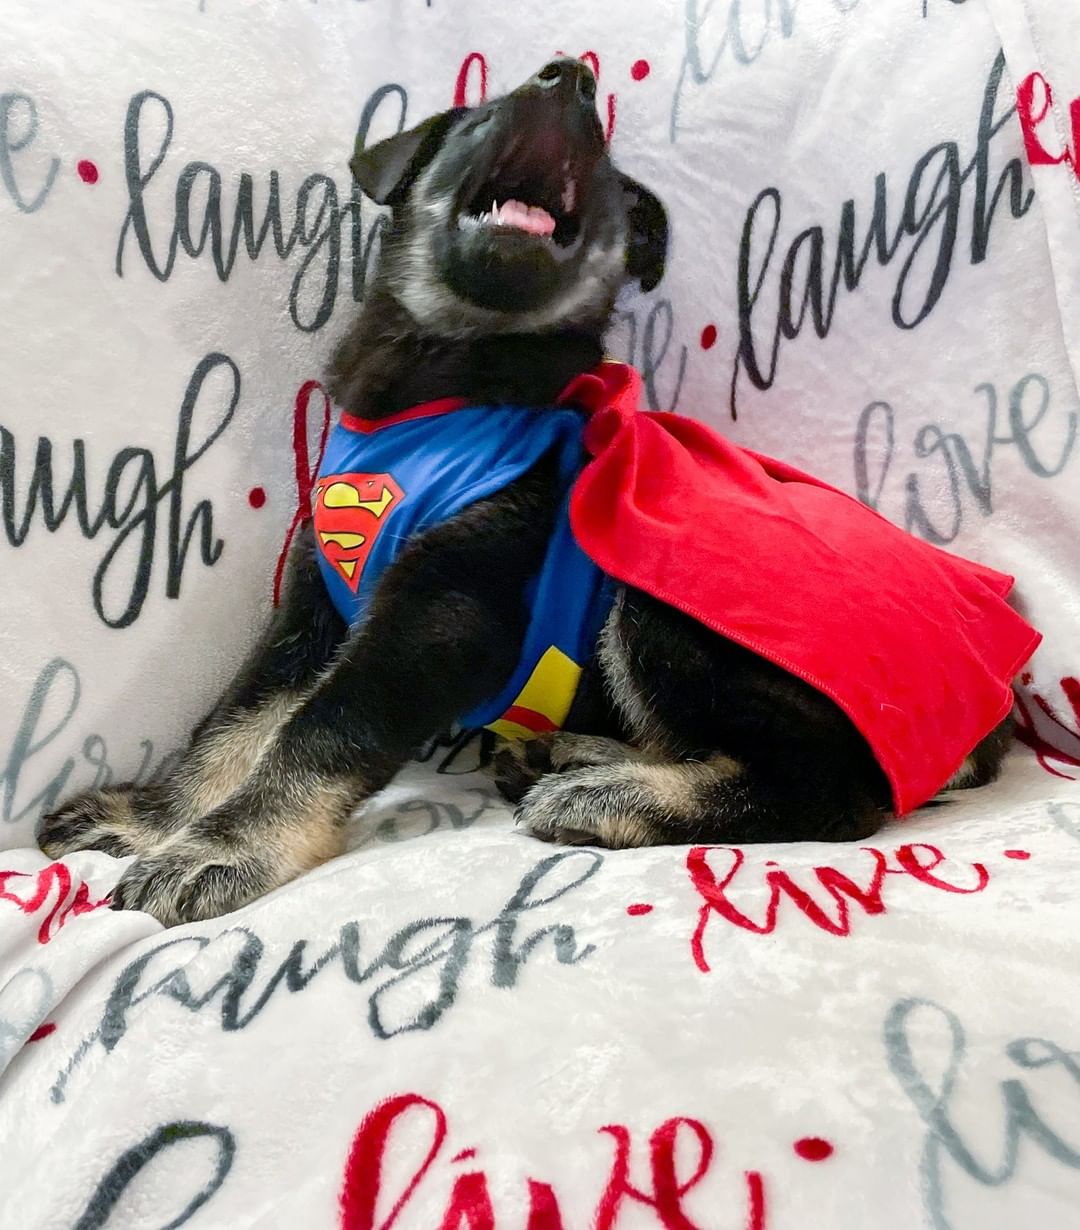 🕸🖤🎃👻 SPOOKY PUP OF THE DAY 👻🎃🖤🕸

Blaze, one of our remaining pups is such a super hero! He turns 10 weeks old today and he is SO READY for his forever home! These pups are going to be HUGE, we are estimating close to 100lbs. His mom is husky / cattle dog/ shepherd, and given the coloring and fur type of these pups, we think dad was something pretty big and fluffy too! We can't wait to see them all grown up! 

<a target='_blank' href='https://www.instagram.com/explore/tags/puppy/'>#puppy</a> <a target='_blank' href='https://www.instagram.com/explore/tags/huskypuppy/'>#huskypuppy</a> <a target='_blank' href='https://www.instagram.com/explore/tags/shepherdpuppy/'>#shepherdpuppy</a> <a target='_blank' href='https://www.instagram.com/explore/tags/huskymix/'>#huskymix</a> <a target='_blank' href='https://www.instagram.com/explore/tags/shepskypuppy/'>#shepskypuppy</a> <a target='_blank' href='https://www.instagram.com/explore/tags/shepsky/'>#shepsky</a> <a target='_blank' href='https://www.instagram.com/explore/tags/halloween/'>#halloween</a> <a target='_blank' href='https://www.instagram.com/explore/tags/spooky/'>#spooky</a> <a target='_blank' href='https://www.instagram.com/explore/tags/azhuskyrescue/'>#azhuskyrescue</a> <a target='_blank' href='https://www.instagram.com/explore/tags/azhusky/'>#azhusky</a> <a target='_blank' href='https://www.instagram.com/explore/tags/adopt/'>#adopt</a> <a target='_blank' href='https://www.instagram.com/explore/tags/adoptdontshop/'>#adoptdontshop</a> <a target='_blank' href='https://www.instagram.com/explore/tags/rescue/'>#rescue</a> <a target='_blank' href='https://www.instagram.com/explore/tags/huskyrescue/'>#huskyrescue</a> <a target='_blank' href='https://www.instagram.com/explore/tags/shepherdrescue/'>#shepherdrescue</a> <a target='_blank' href='https://www.instagram.com/explore/tags/cattledog/'>#cattledog</a> <a target='_blank' href='https://www.instagram.com/explore/tags/cattledogrescue/'>#cattledogrescue</a> <a target='_blank' href='https://www.instagram.com/explore/tags/superman/'>#superman</a> <a target='_blank' href='https://www.instagram.com/explore/tags/superhero/'>#superhero</a> <a target='_blank' href='https://www.instagram.com/explore/tags/takemehome/'>#takemehome</a>